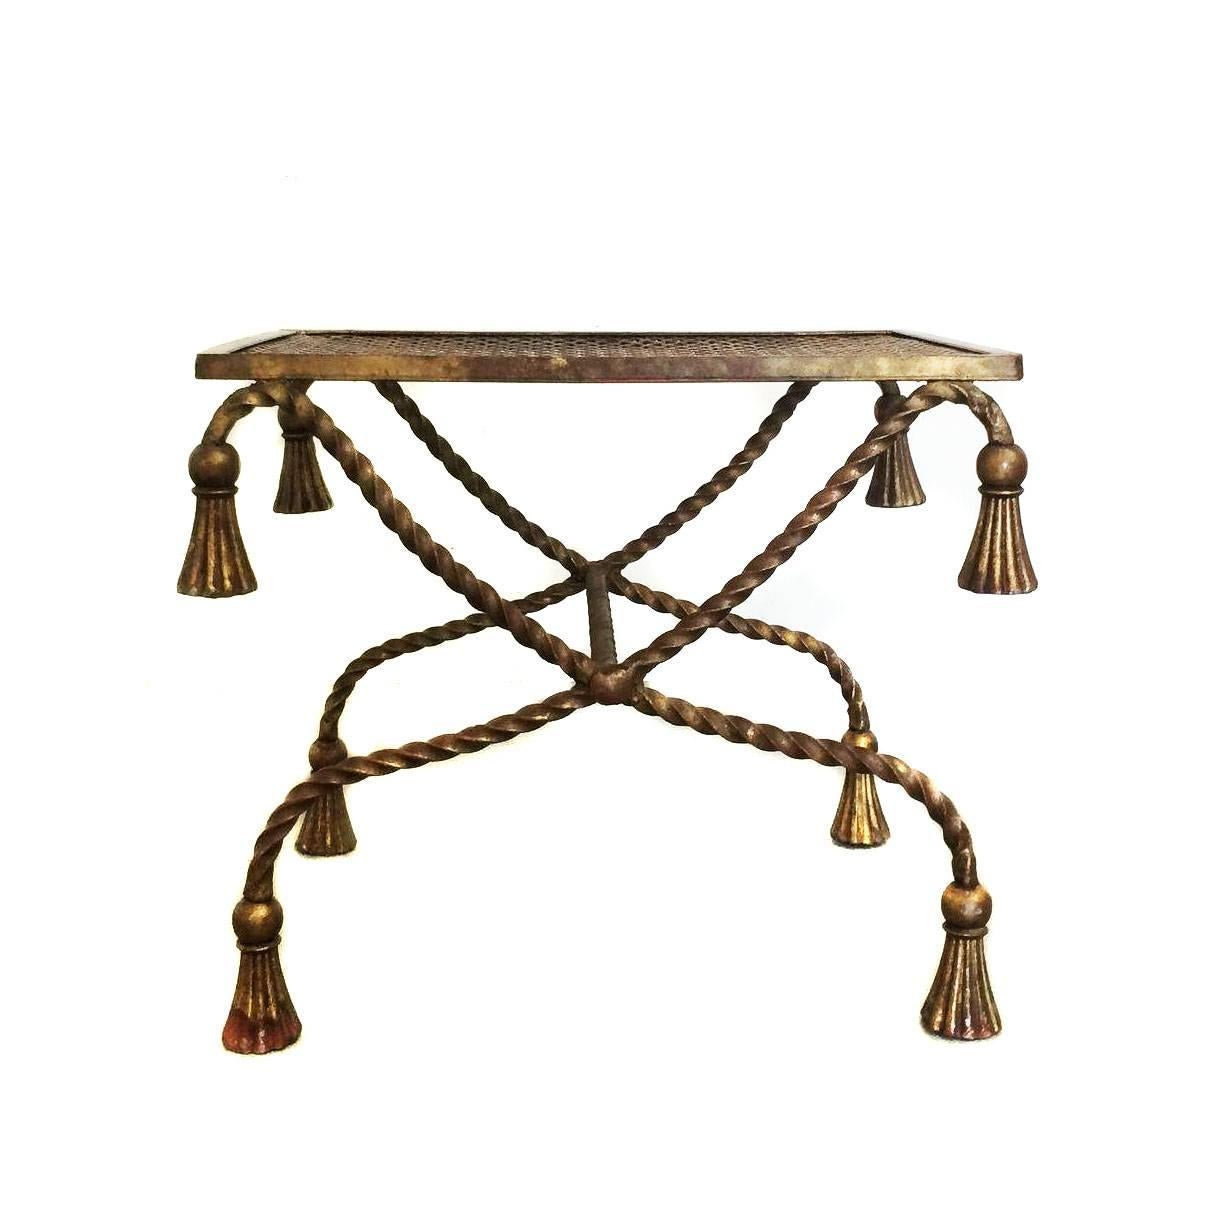 This lovely bench is a classic! Gilt metal in the form of rope with large tassels on the ends. Cushion is in good shape though has some wear due to age.
Measurements: 19.5